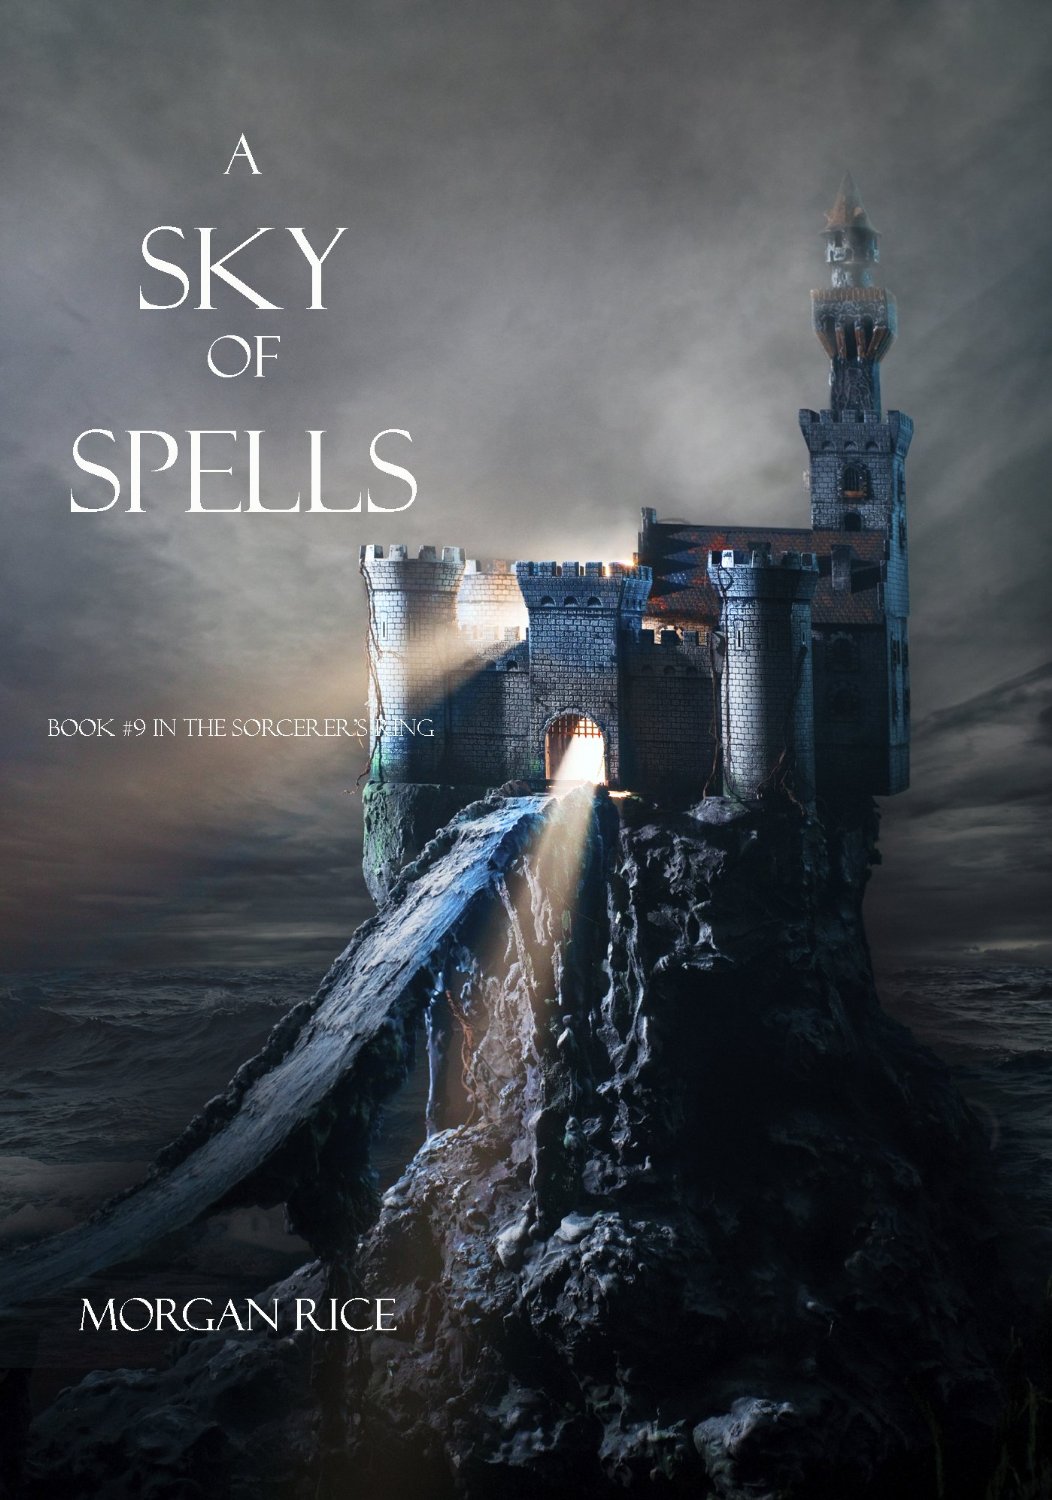 A Sky of Spells (Book #9 in the Sorcerer’s Ring) by Morgan Rice